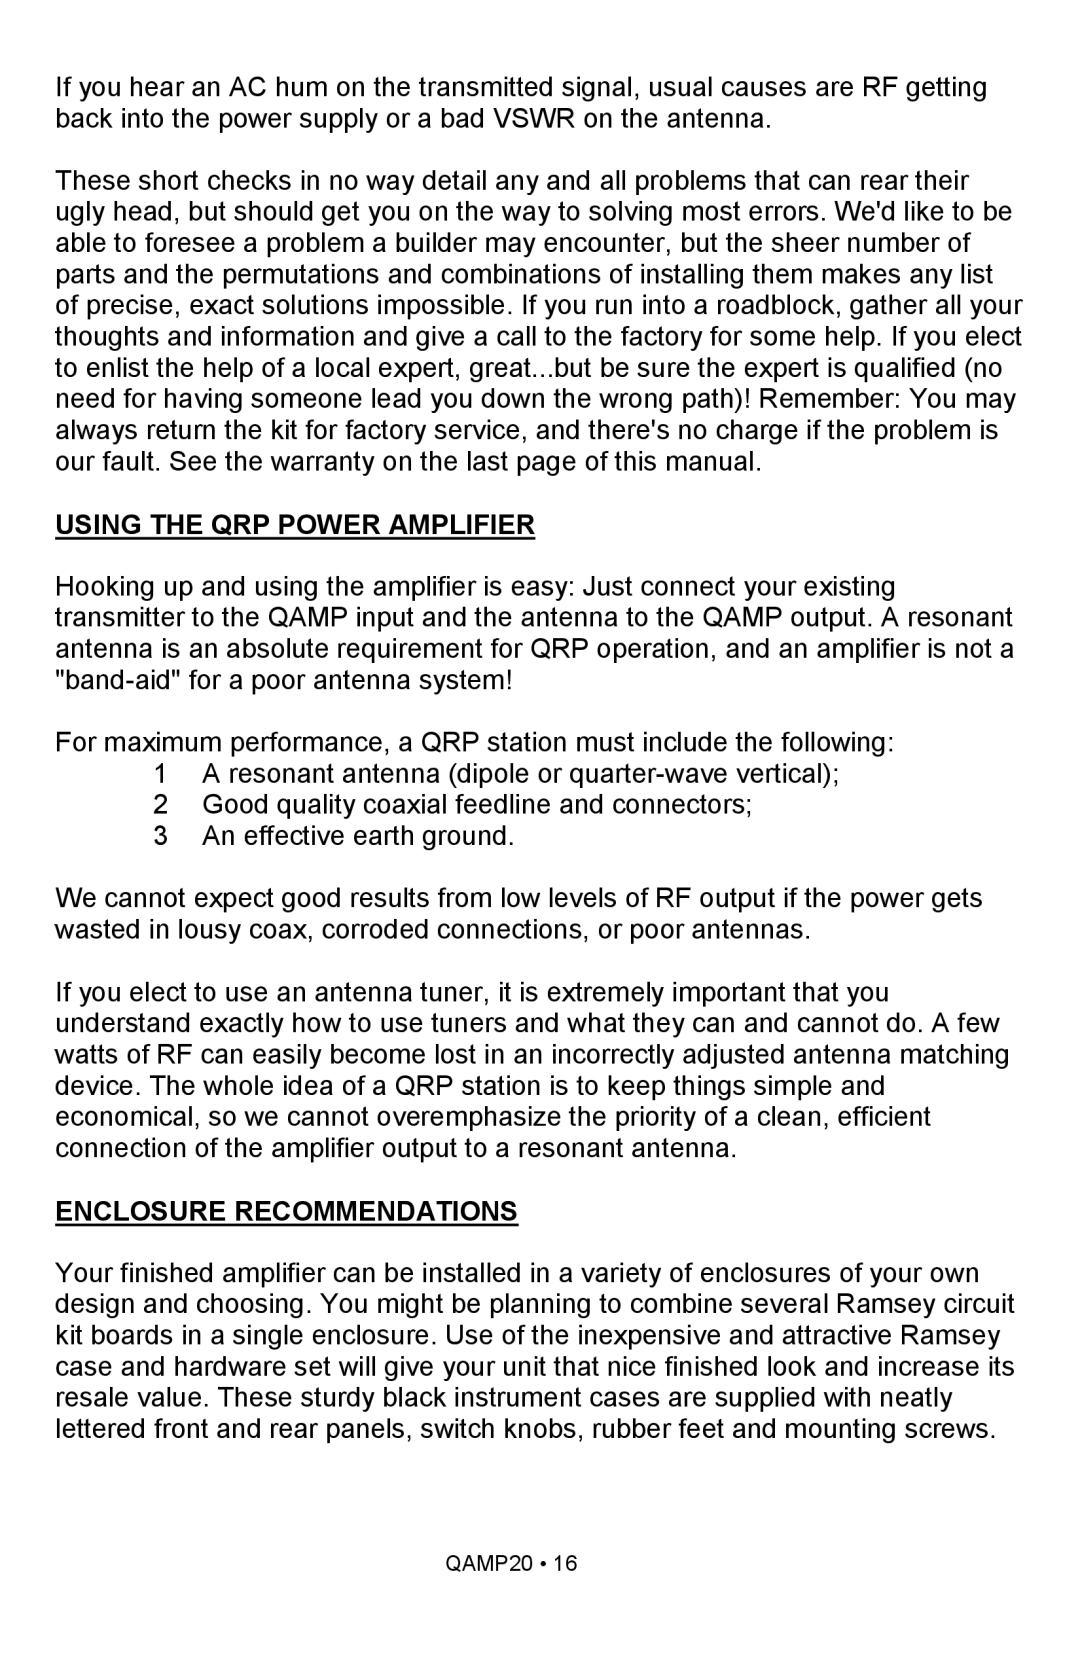 Ramsey Electronics QAMP20 manual Using The Qrp Power Amplifier, Enclosure Recommendations 